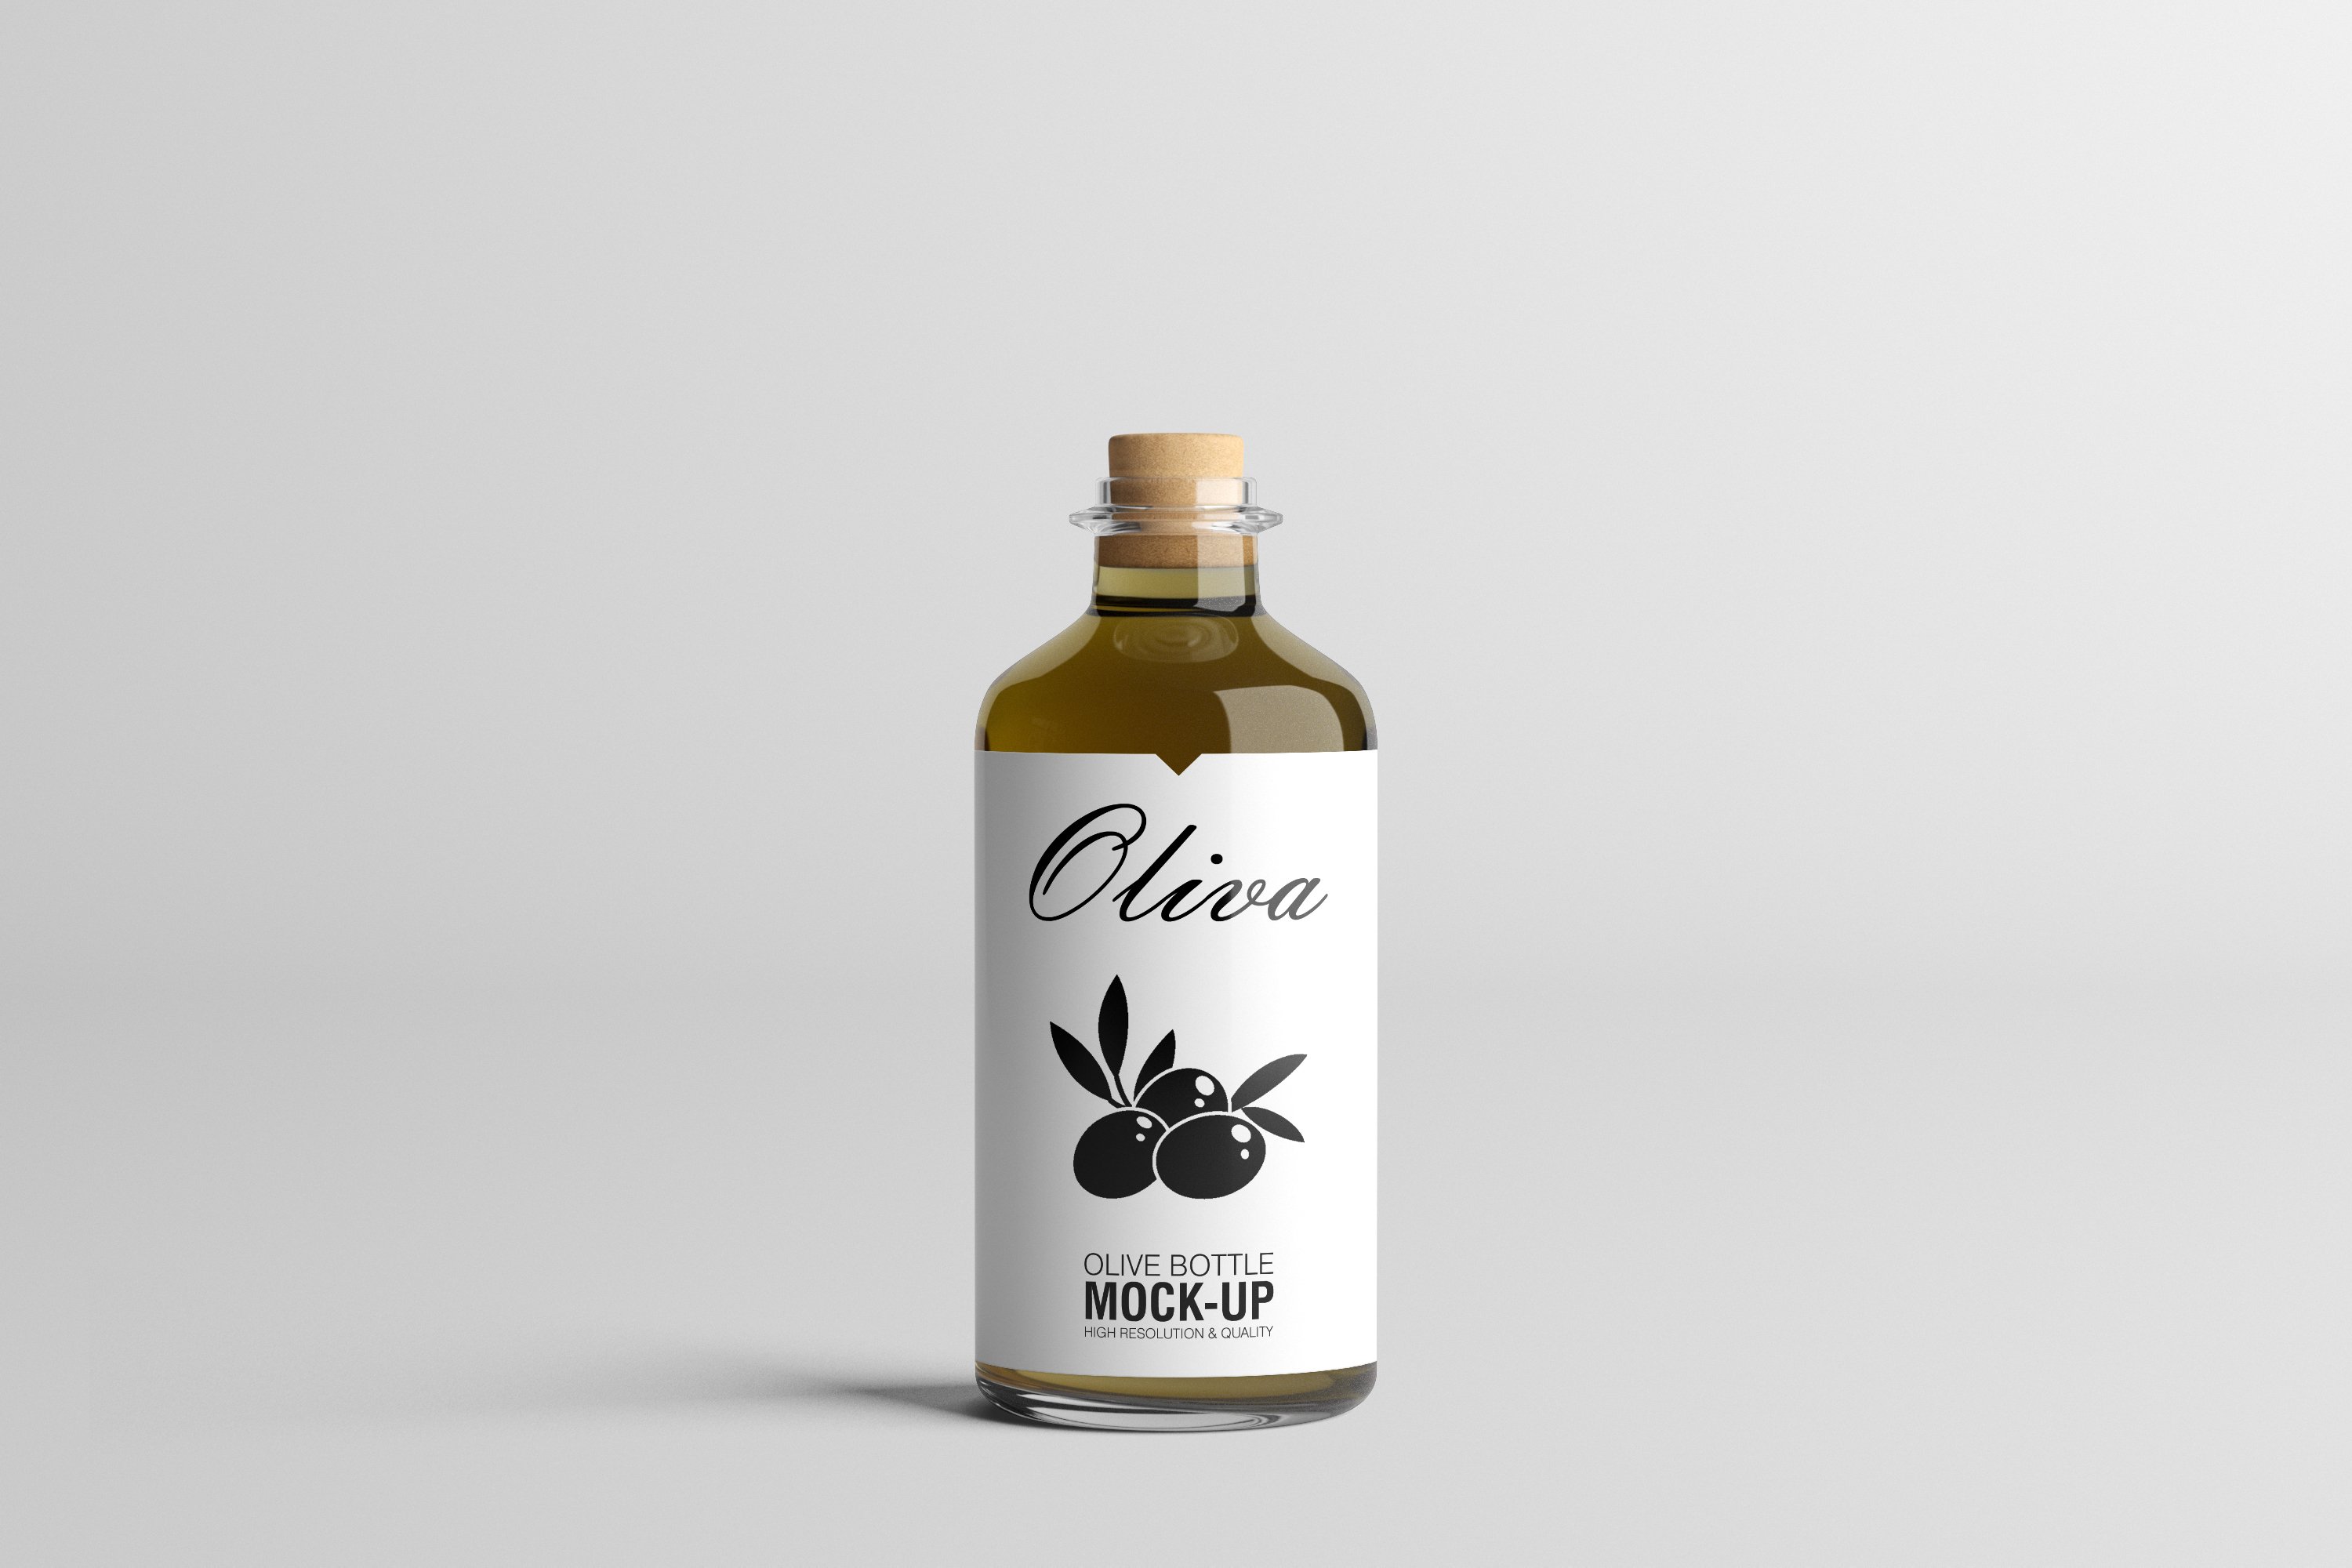 Stylish white label for olive oil with thematic logo.